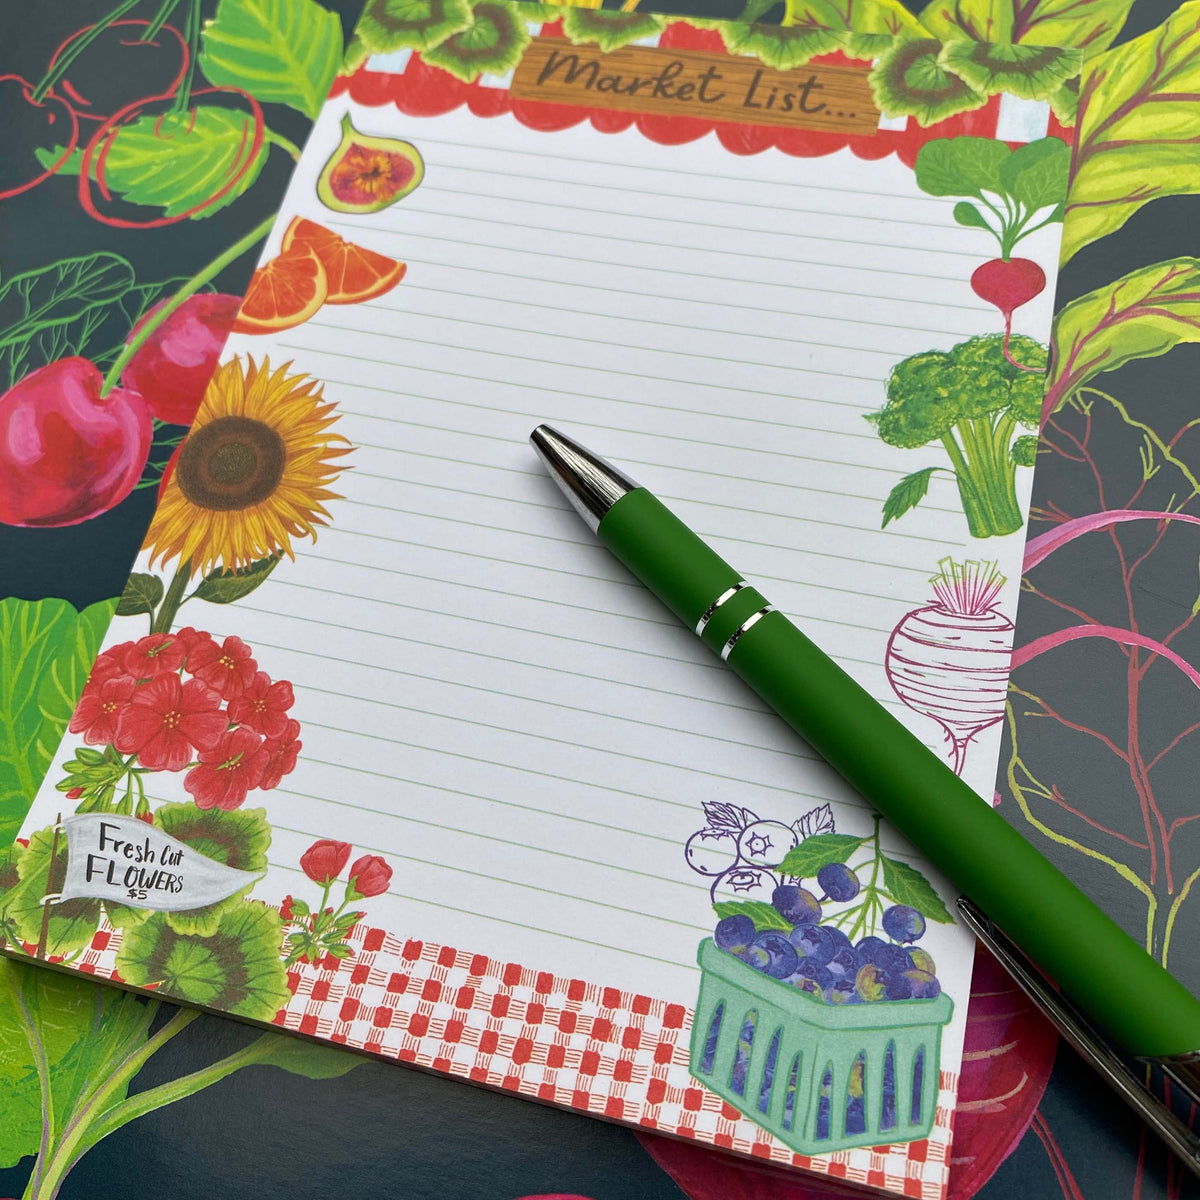 black background with colorful fruits and vegetables. A Market List Notepad sits on top of this illustration containing illustrations of fruits, vegetables and flowers.  A green pen sits on top of the notebad. 